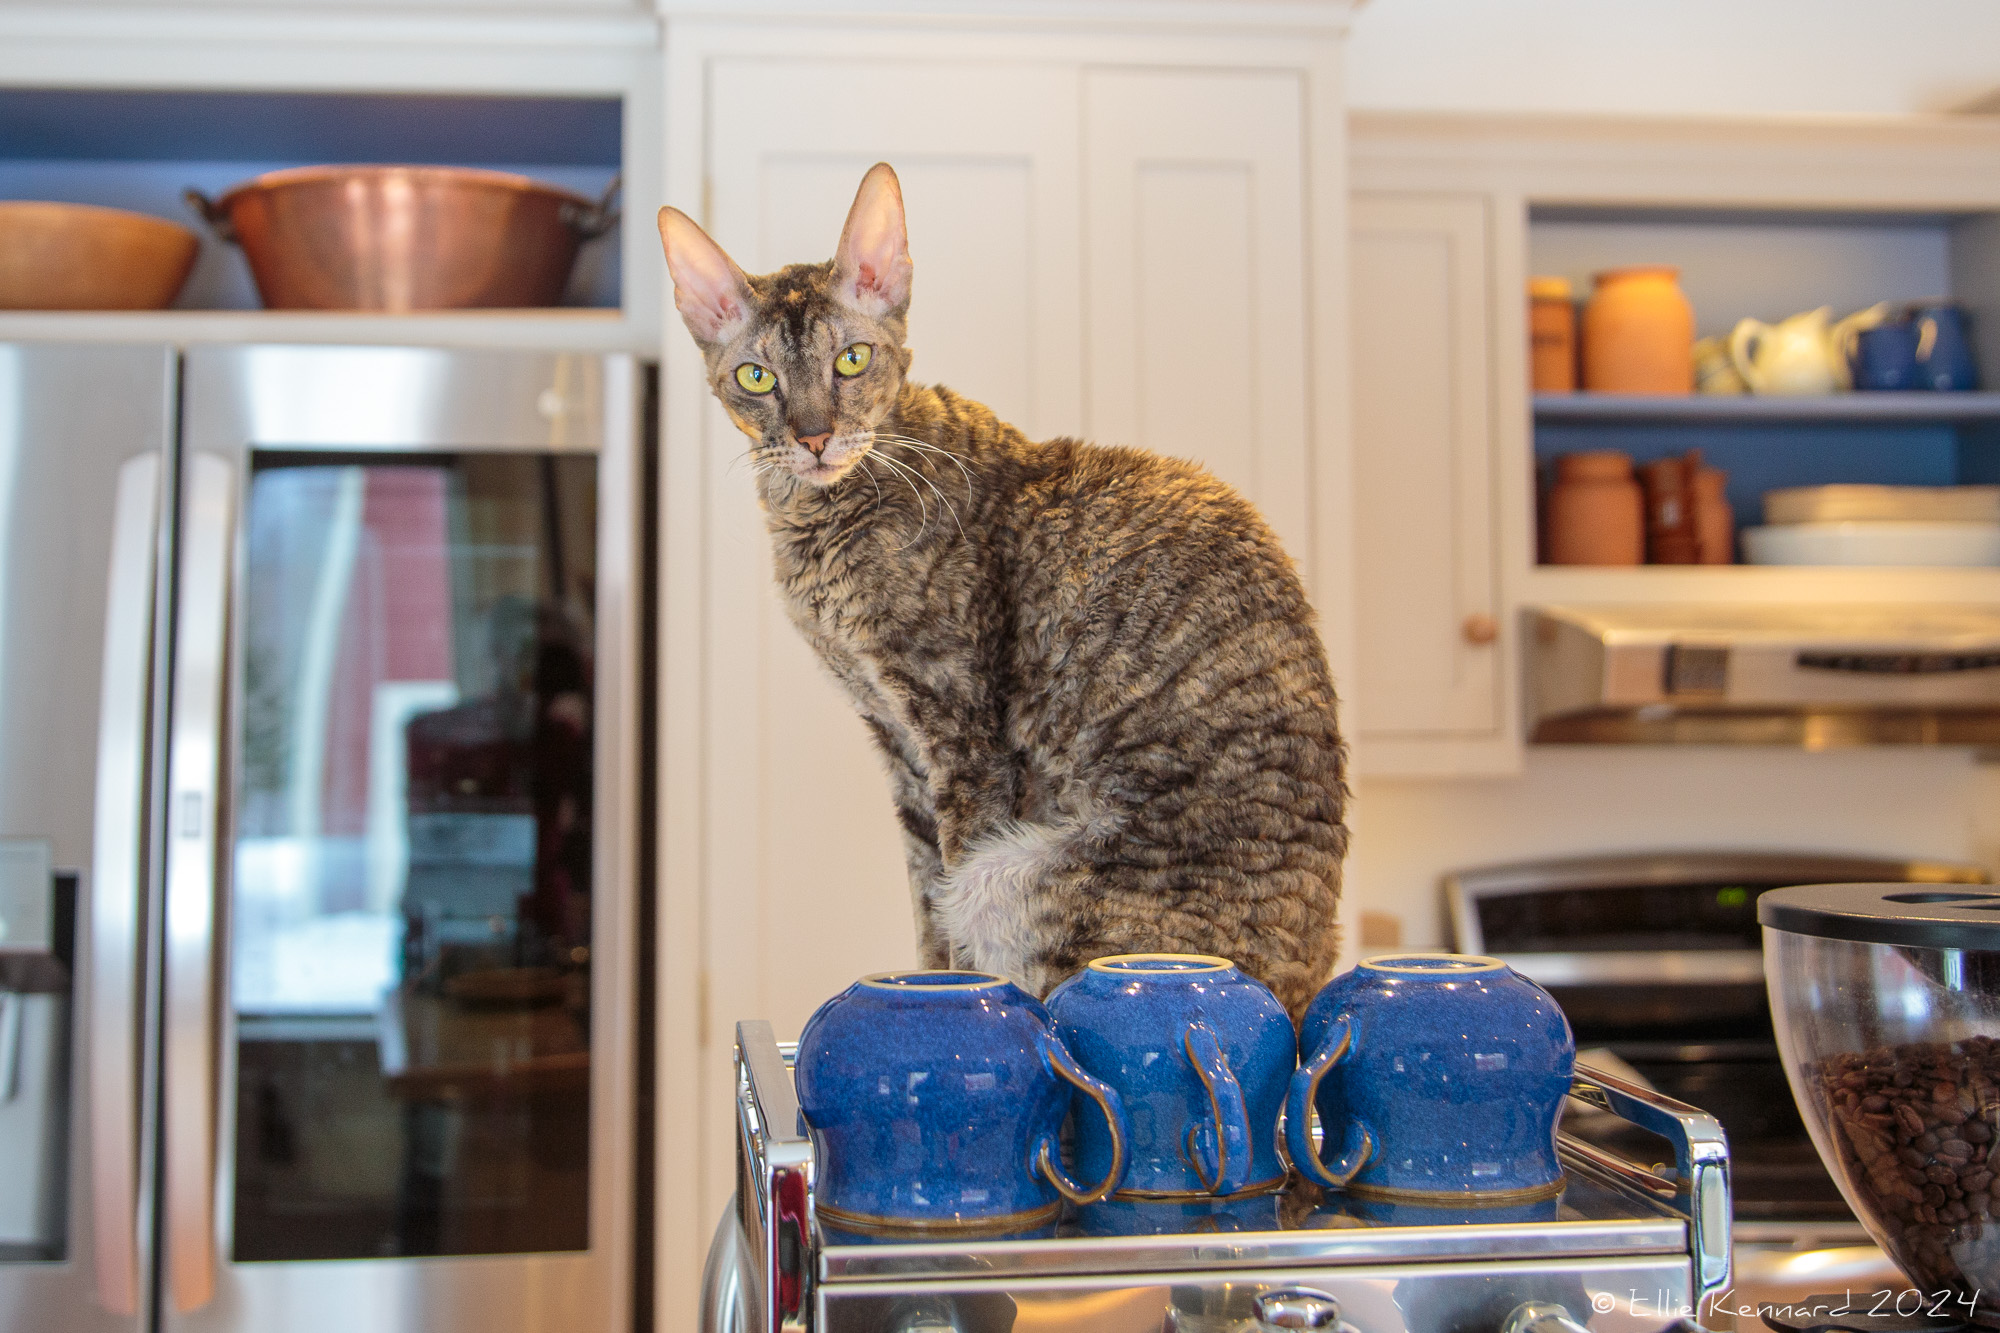 A brown, cream and black tabby cat with curly hair and big ears is sitting on a coffee machine behind 3 blue coffee mugs that are upside down to wrarm. She is looking directly at the camera with her yellow eyes. Cupboards, shelves and a fridge are behind her, with kitchen paraphenalia.